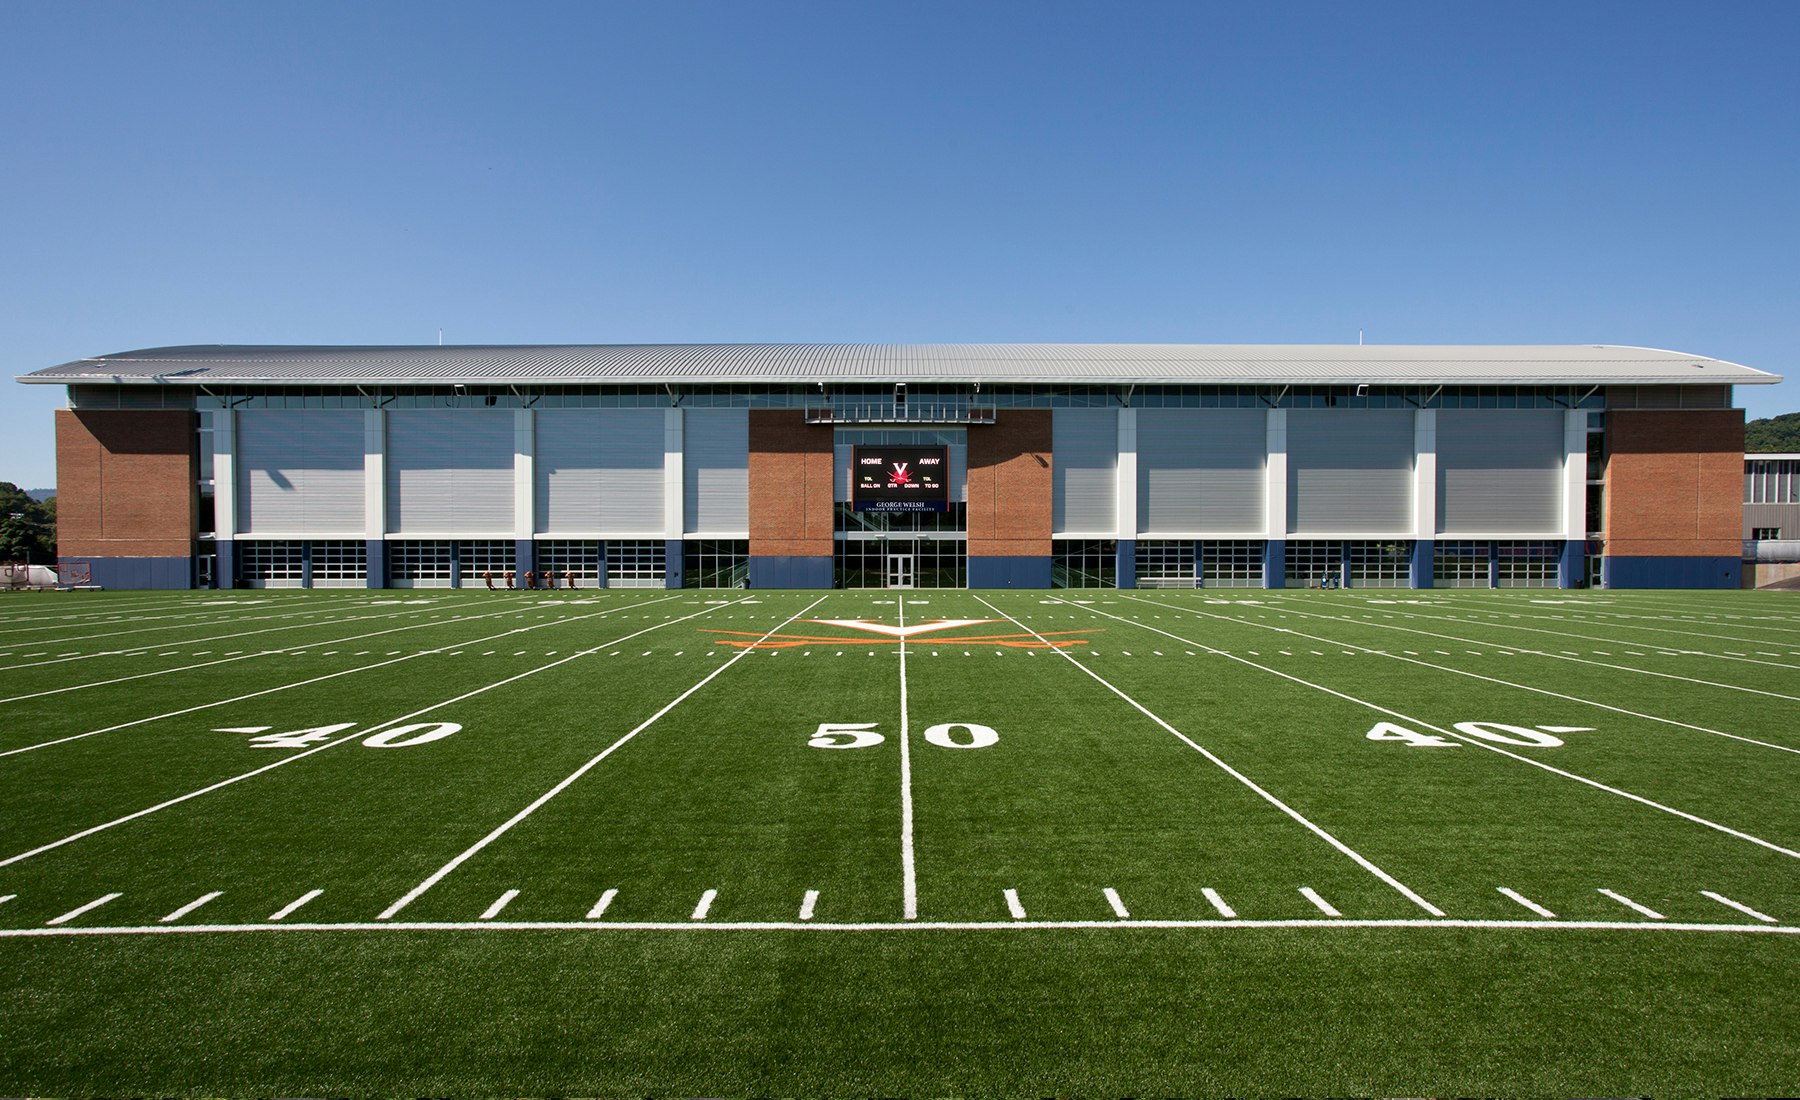 The Fieldhouse was sited on an existing football practice field to take advantage of adjacent locker rooms, offices, and other support facilities.